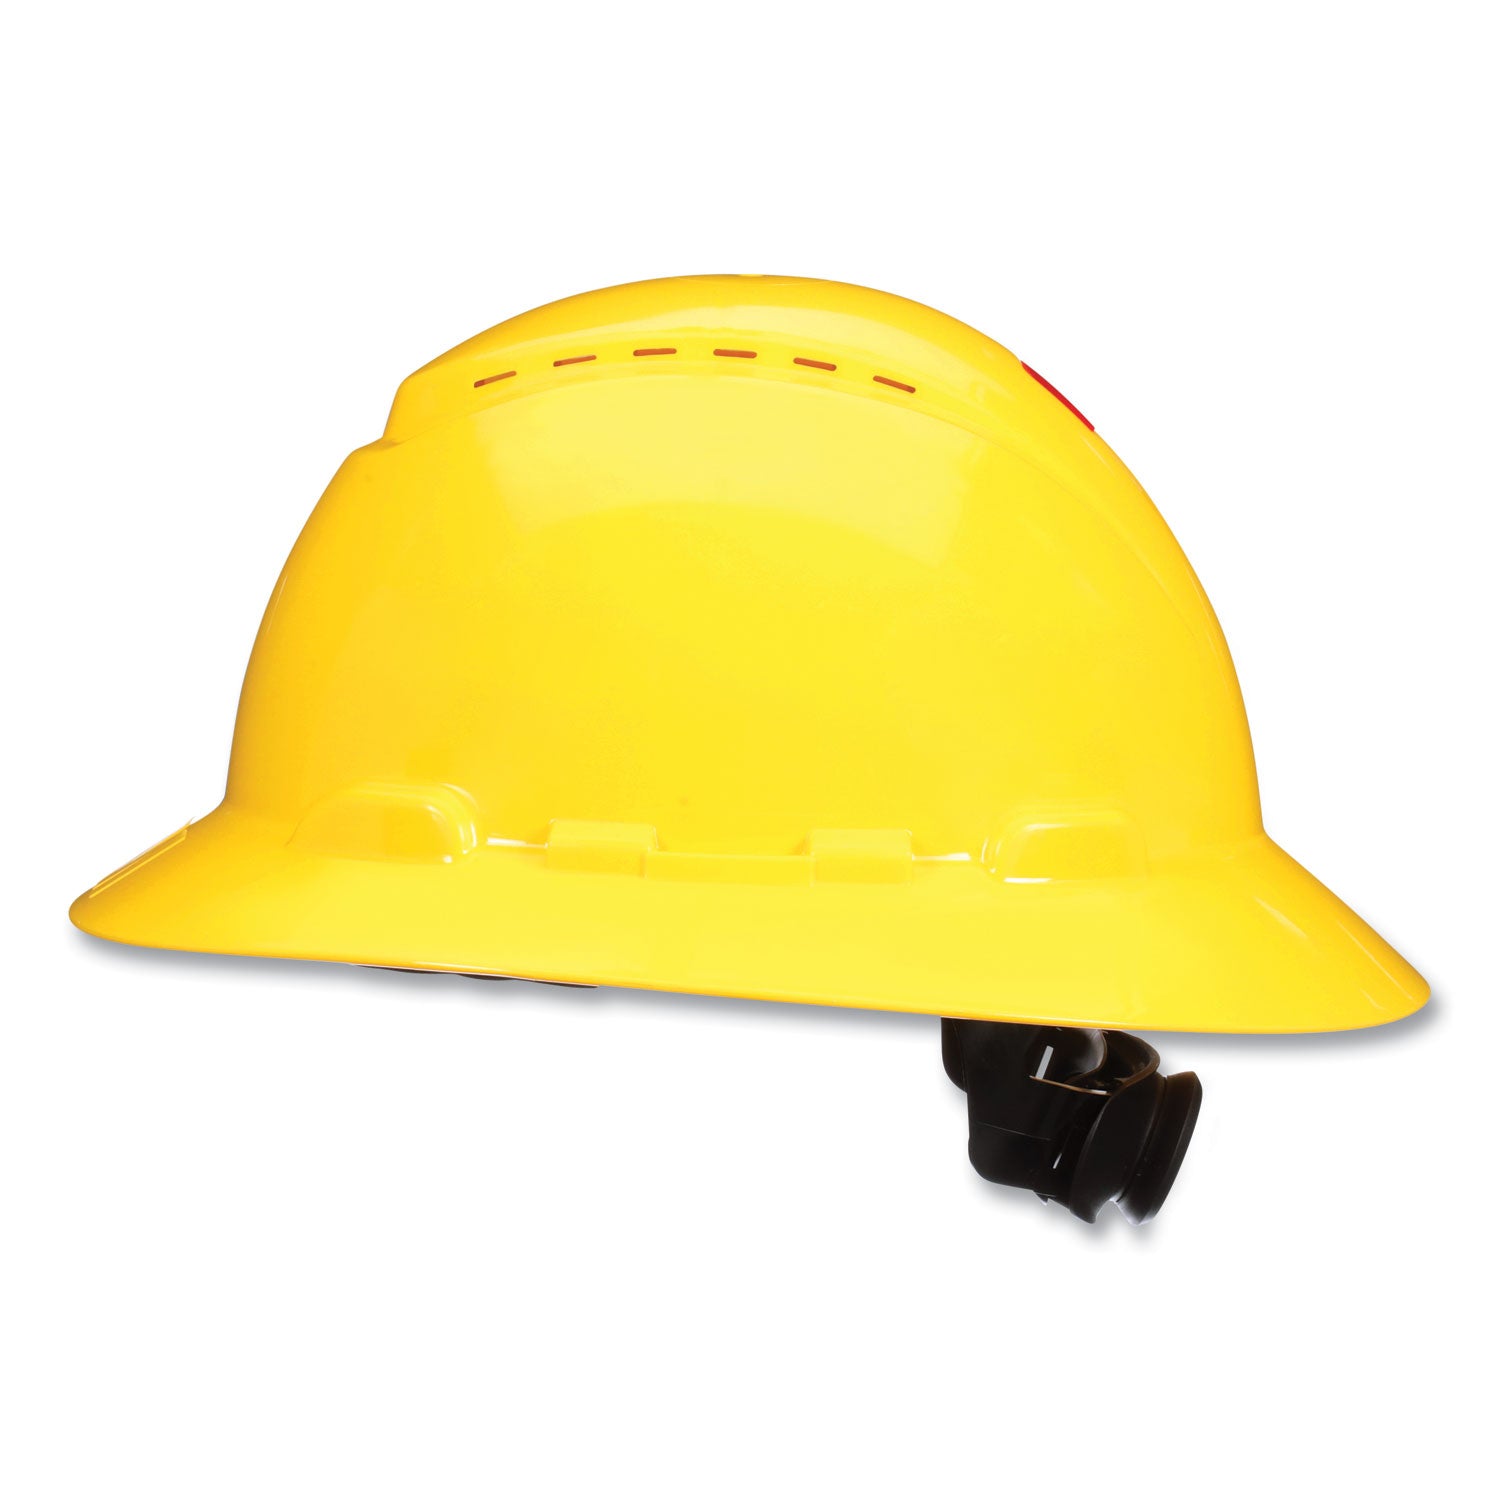 securefit-h-series-hard-hats-h-800-vented-hat-with-uv-indicator-4-point-pressure-diffusion-ratchet-suspension-yellow_mmmh802sfvuv - 2